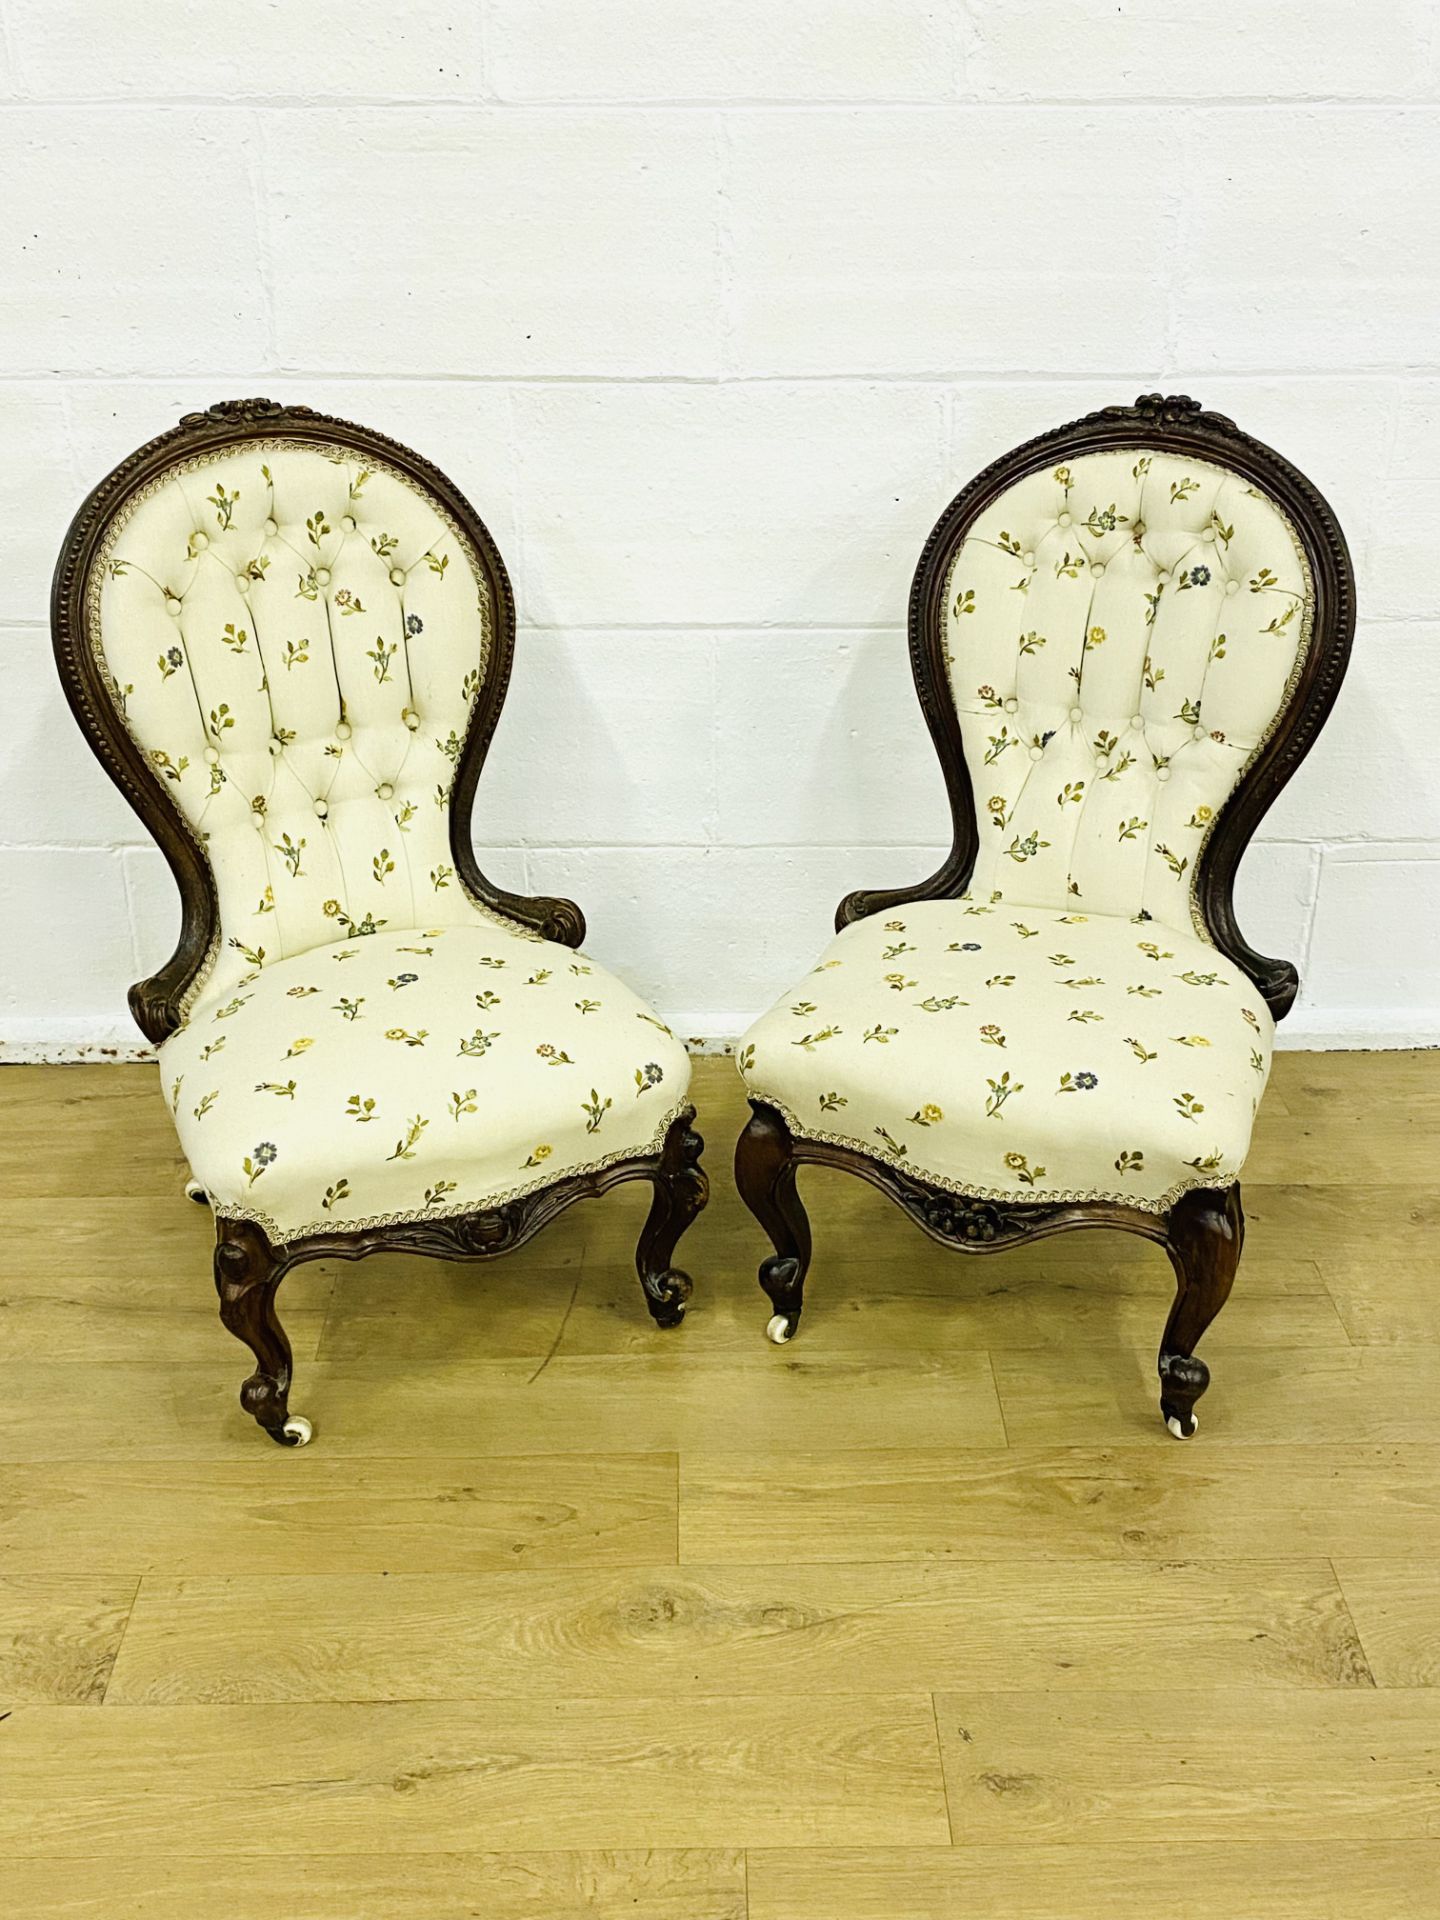 Pair of mahogany framed bedroom chairs - Image 4 of 8